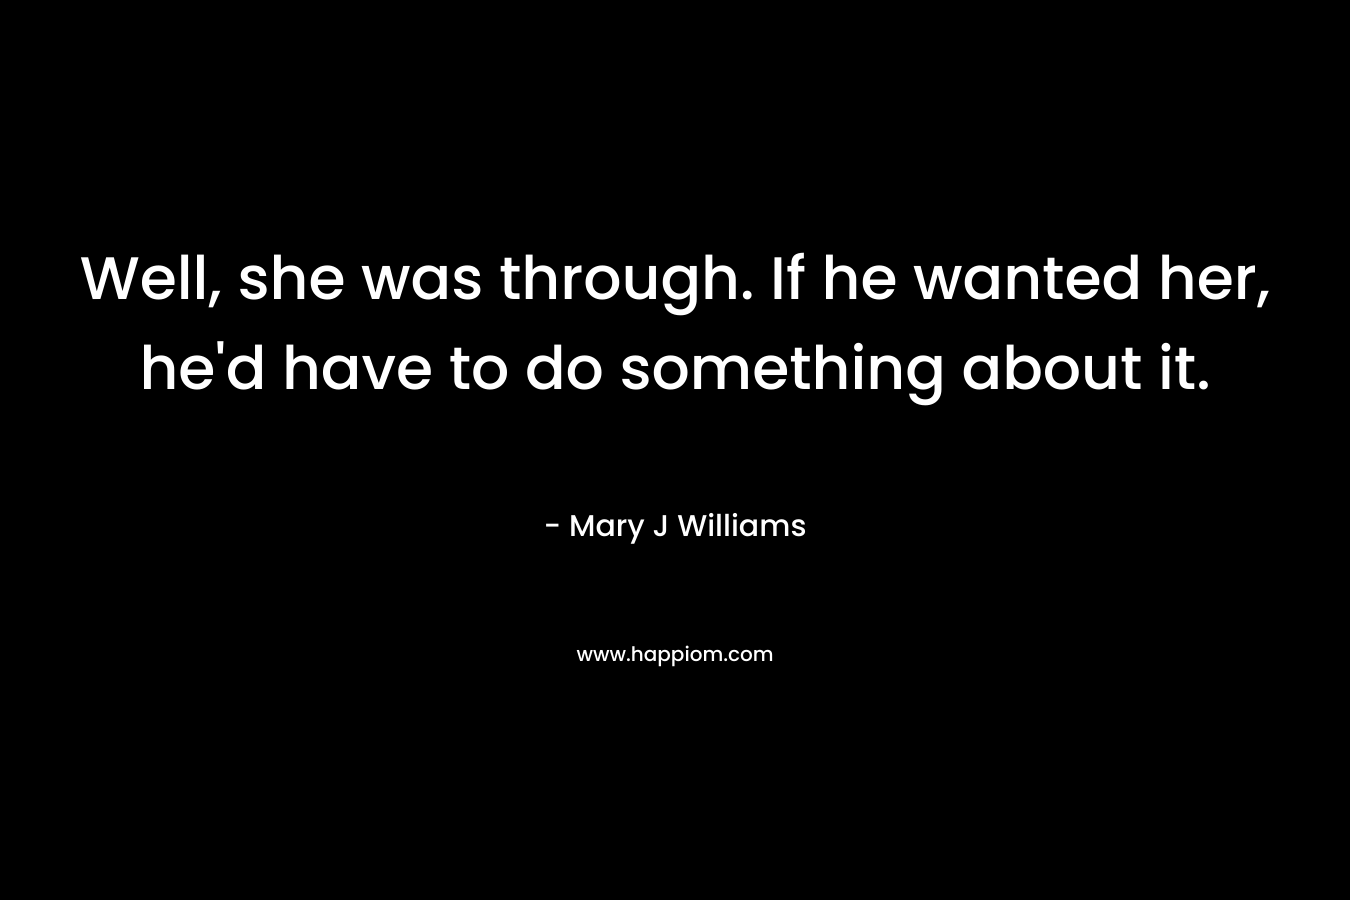 Well, she was through. If he wanted her, he’d have to do something about it. – Mary J Williams